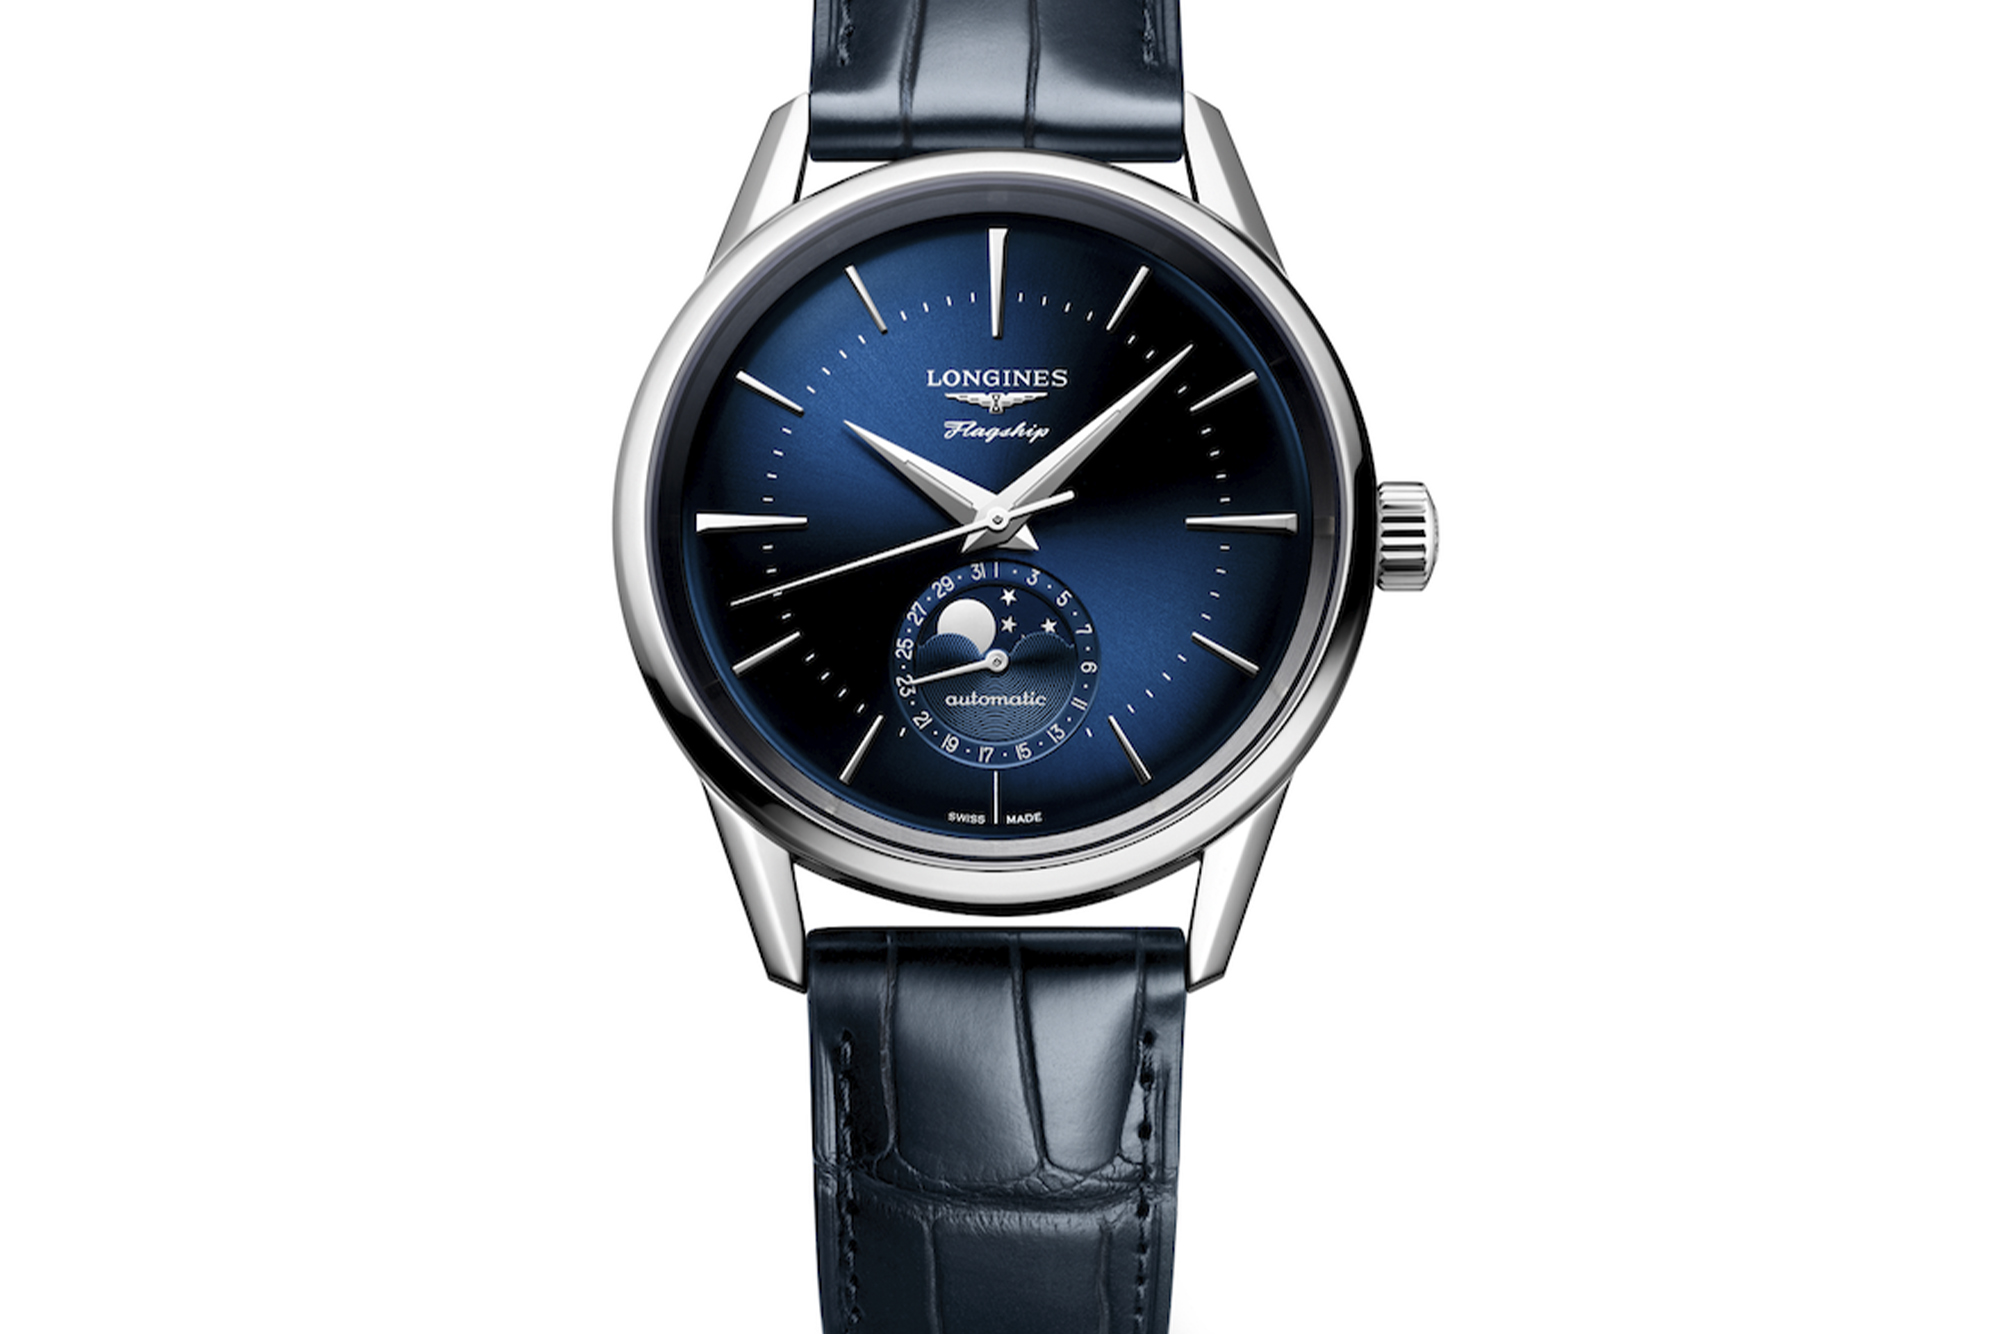 Longines Flagship Heritage Moonphase from of watch with blue navy band